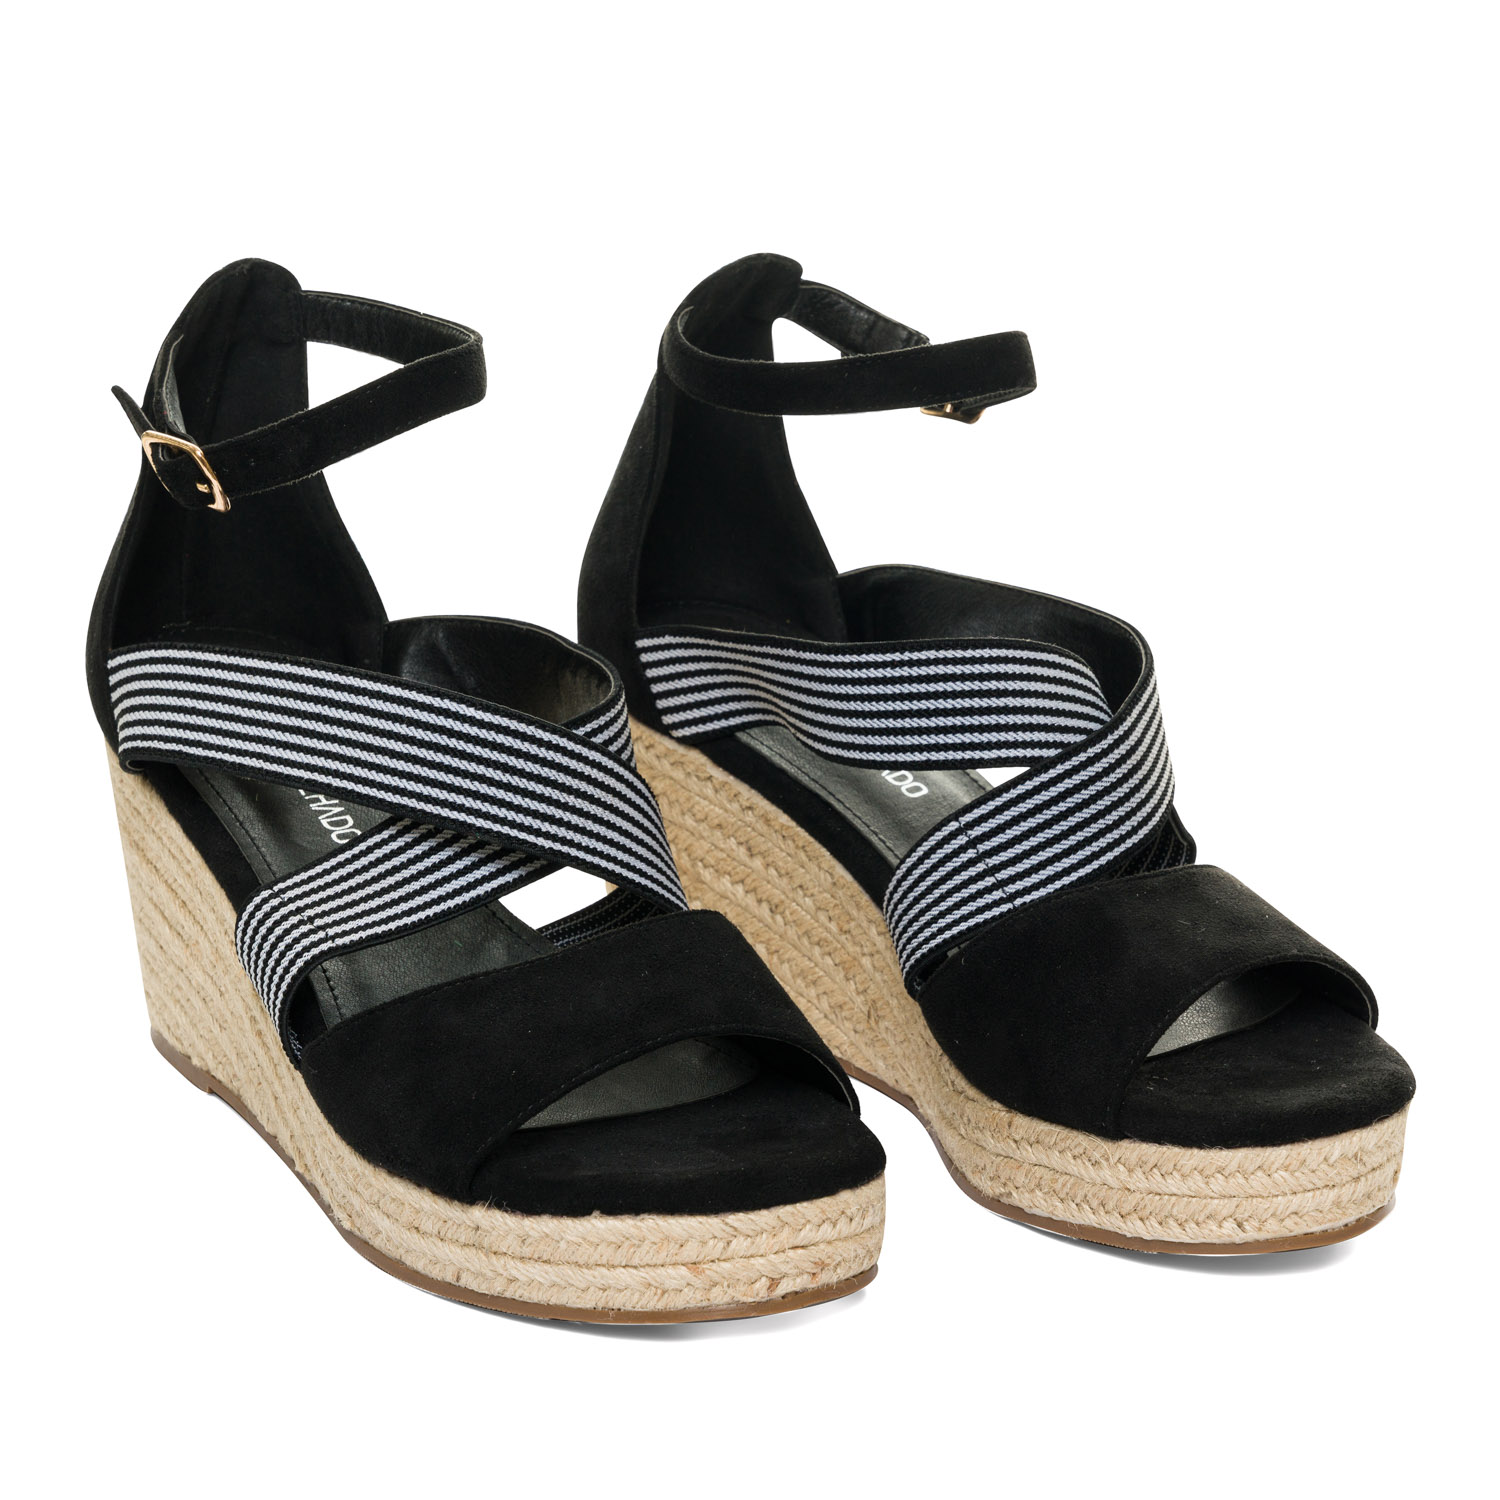 Black faux suede espadrilles with jute wedge 